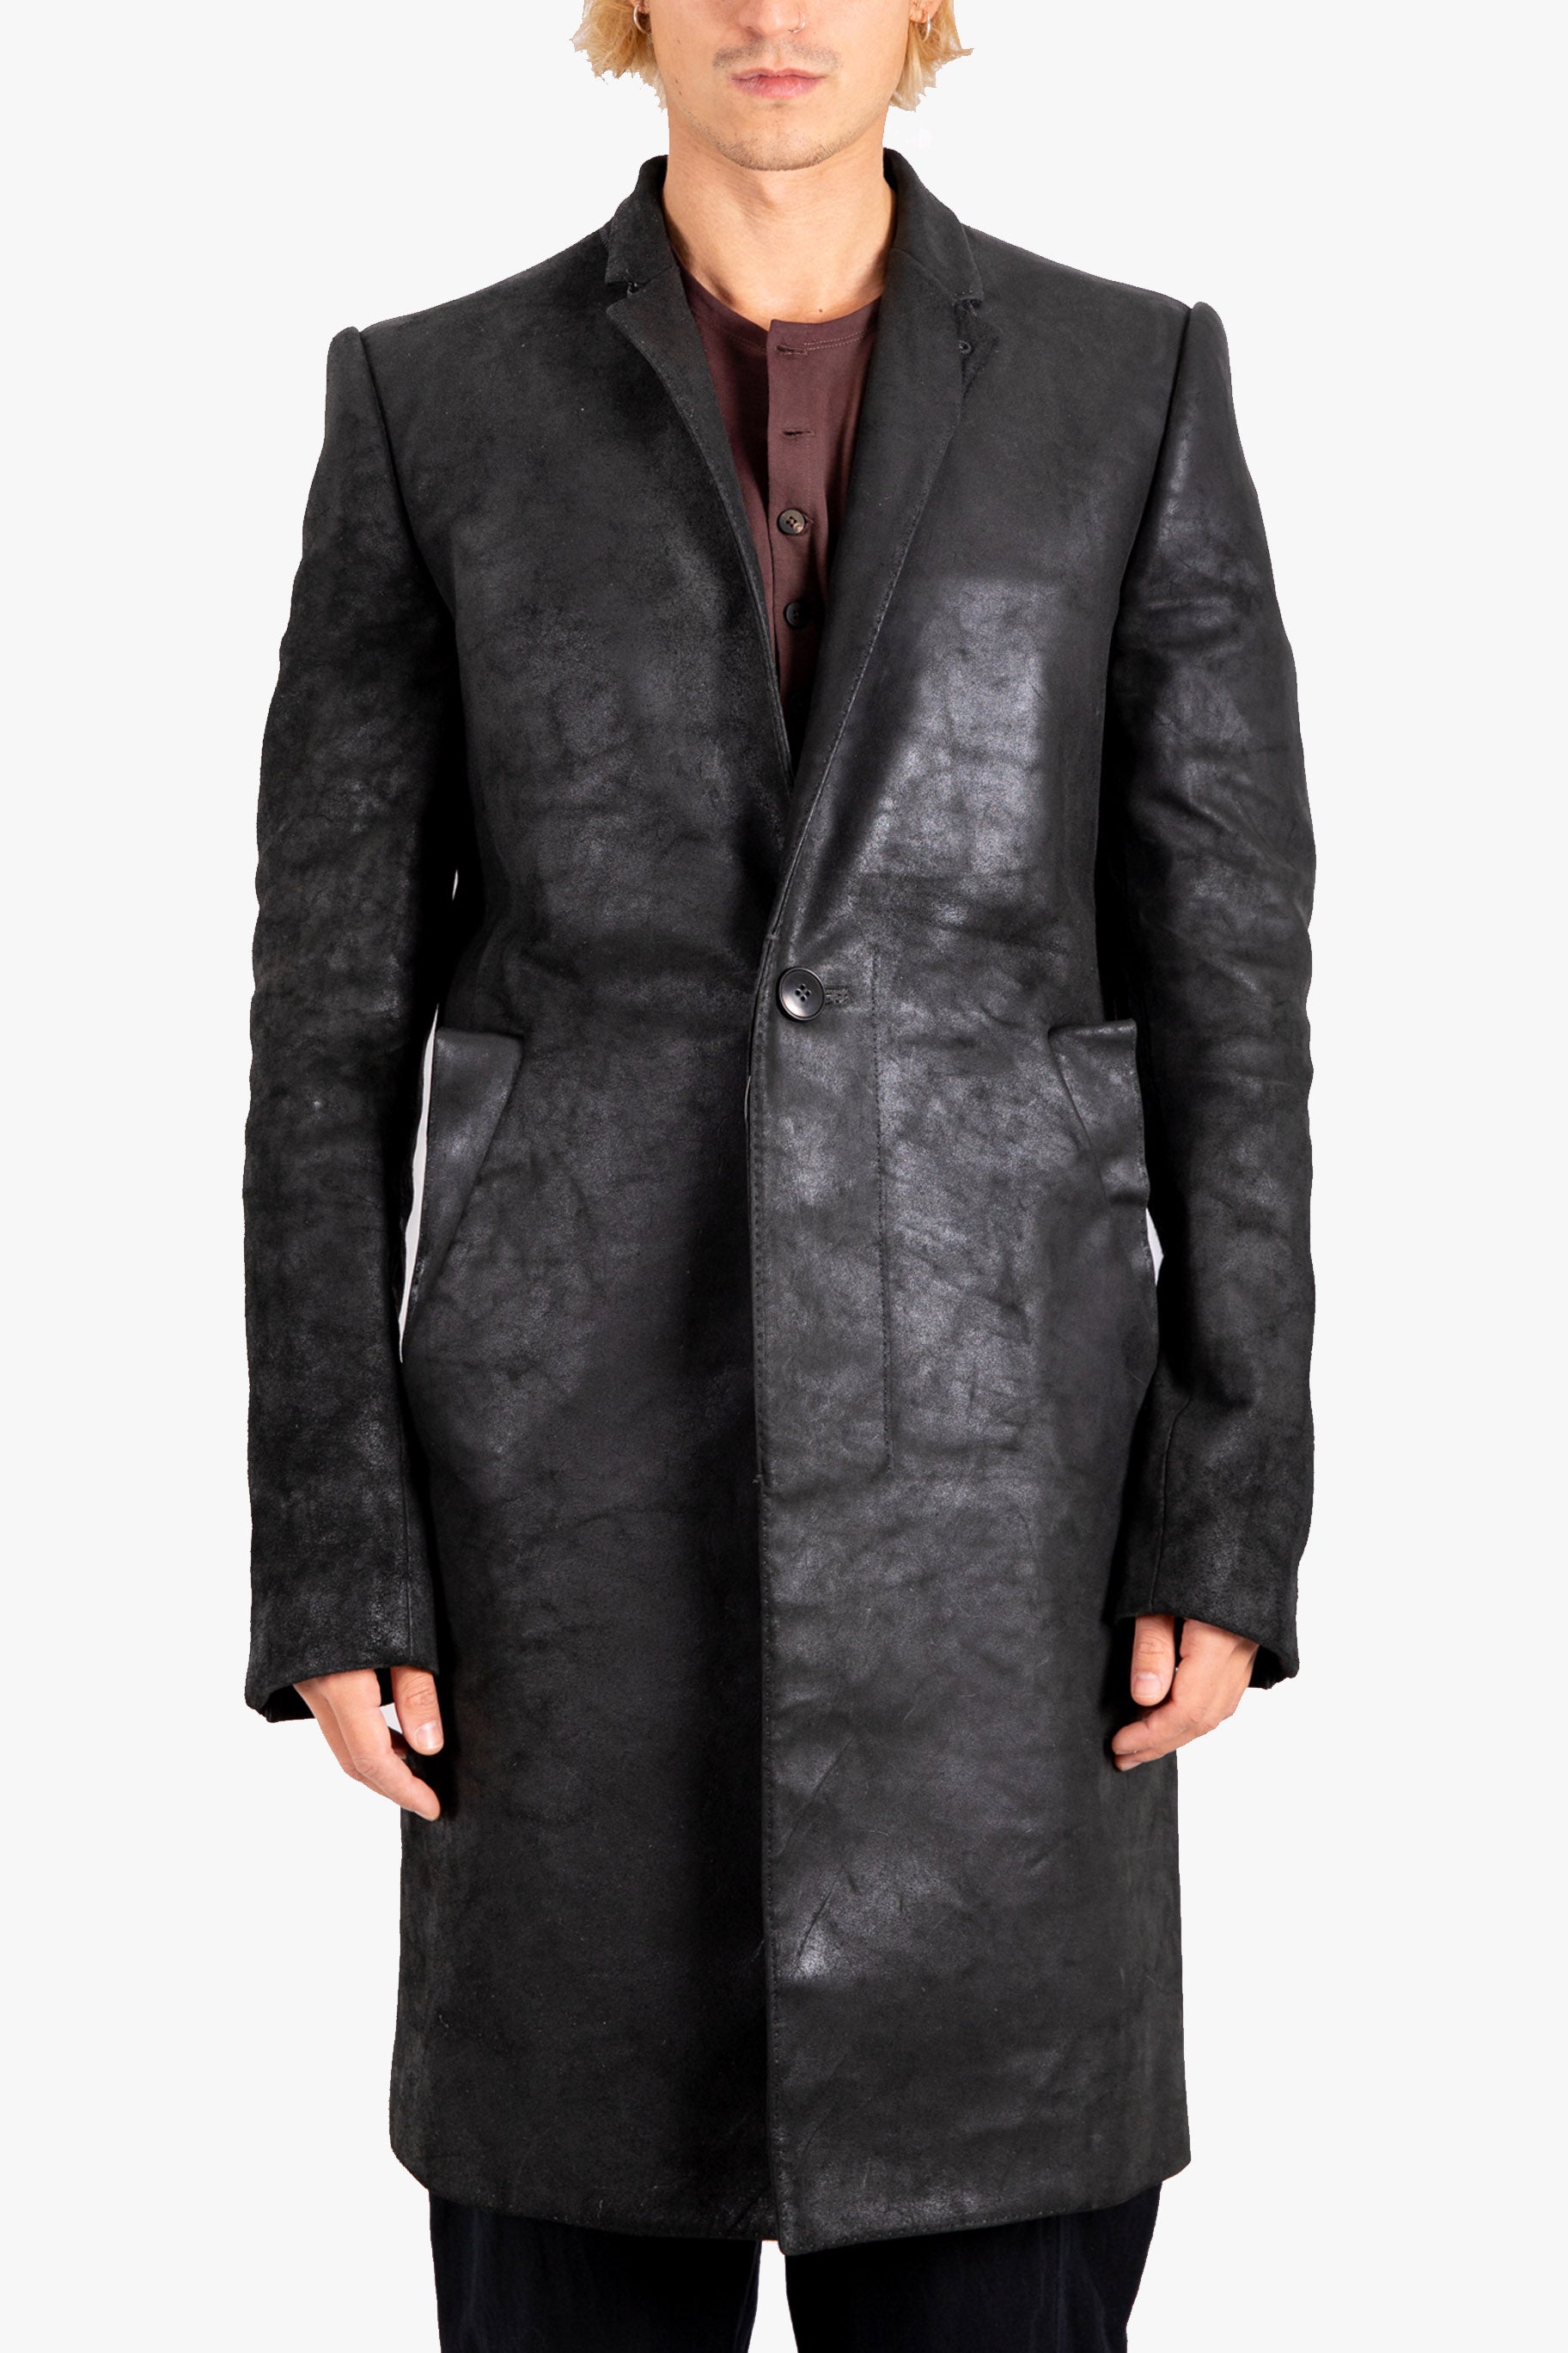 LJ–160 REFLECTIVE LONG LEATHER 2-BUTTON JACKET WITH CUTAWAY DETAIL